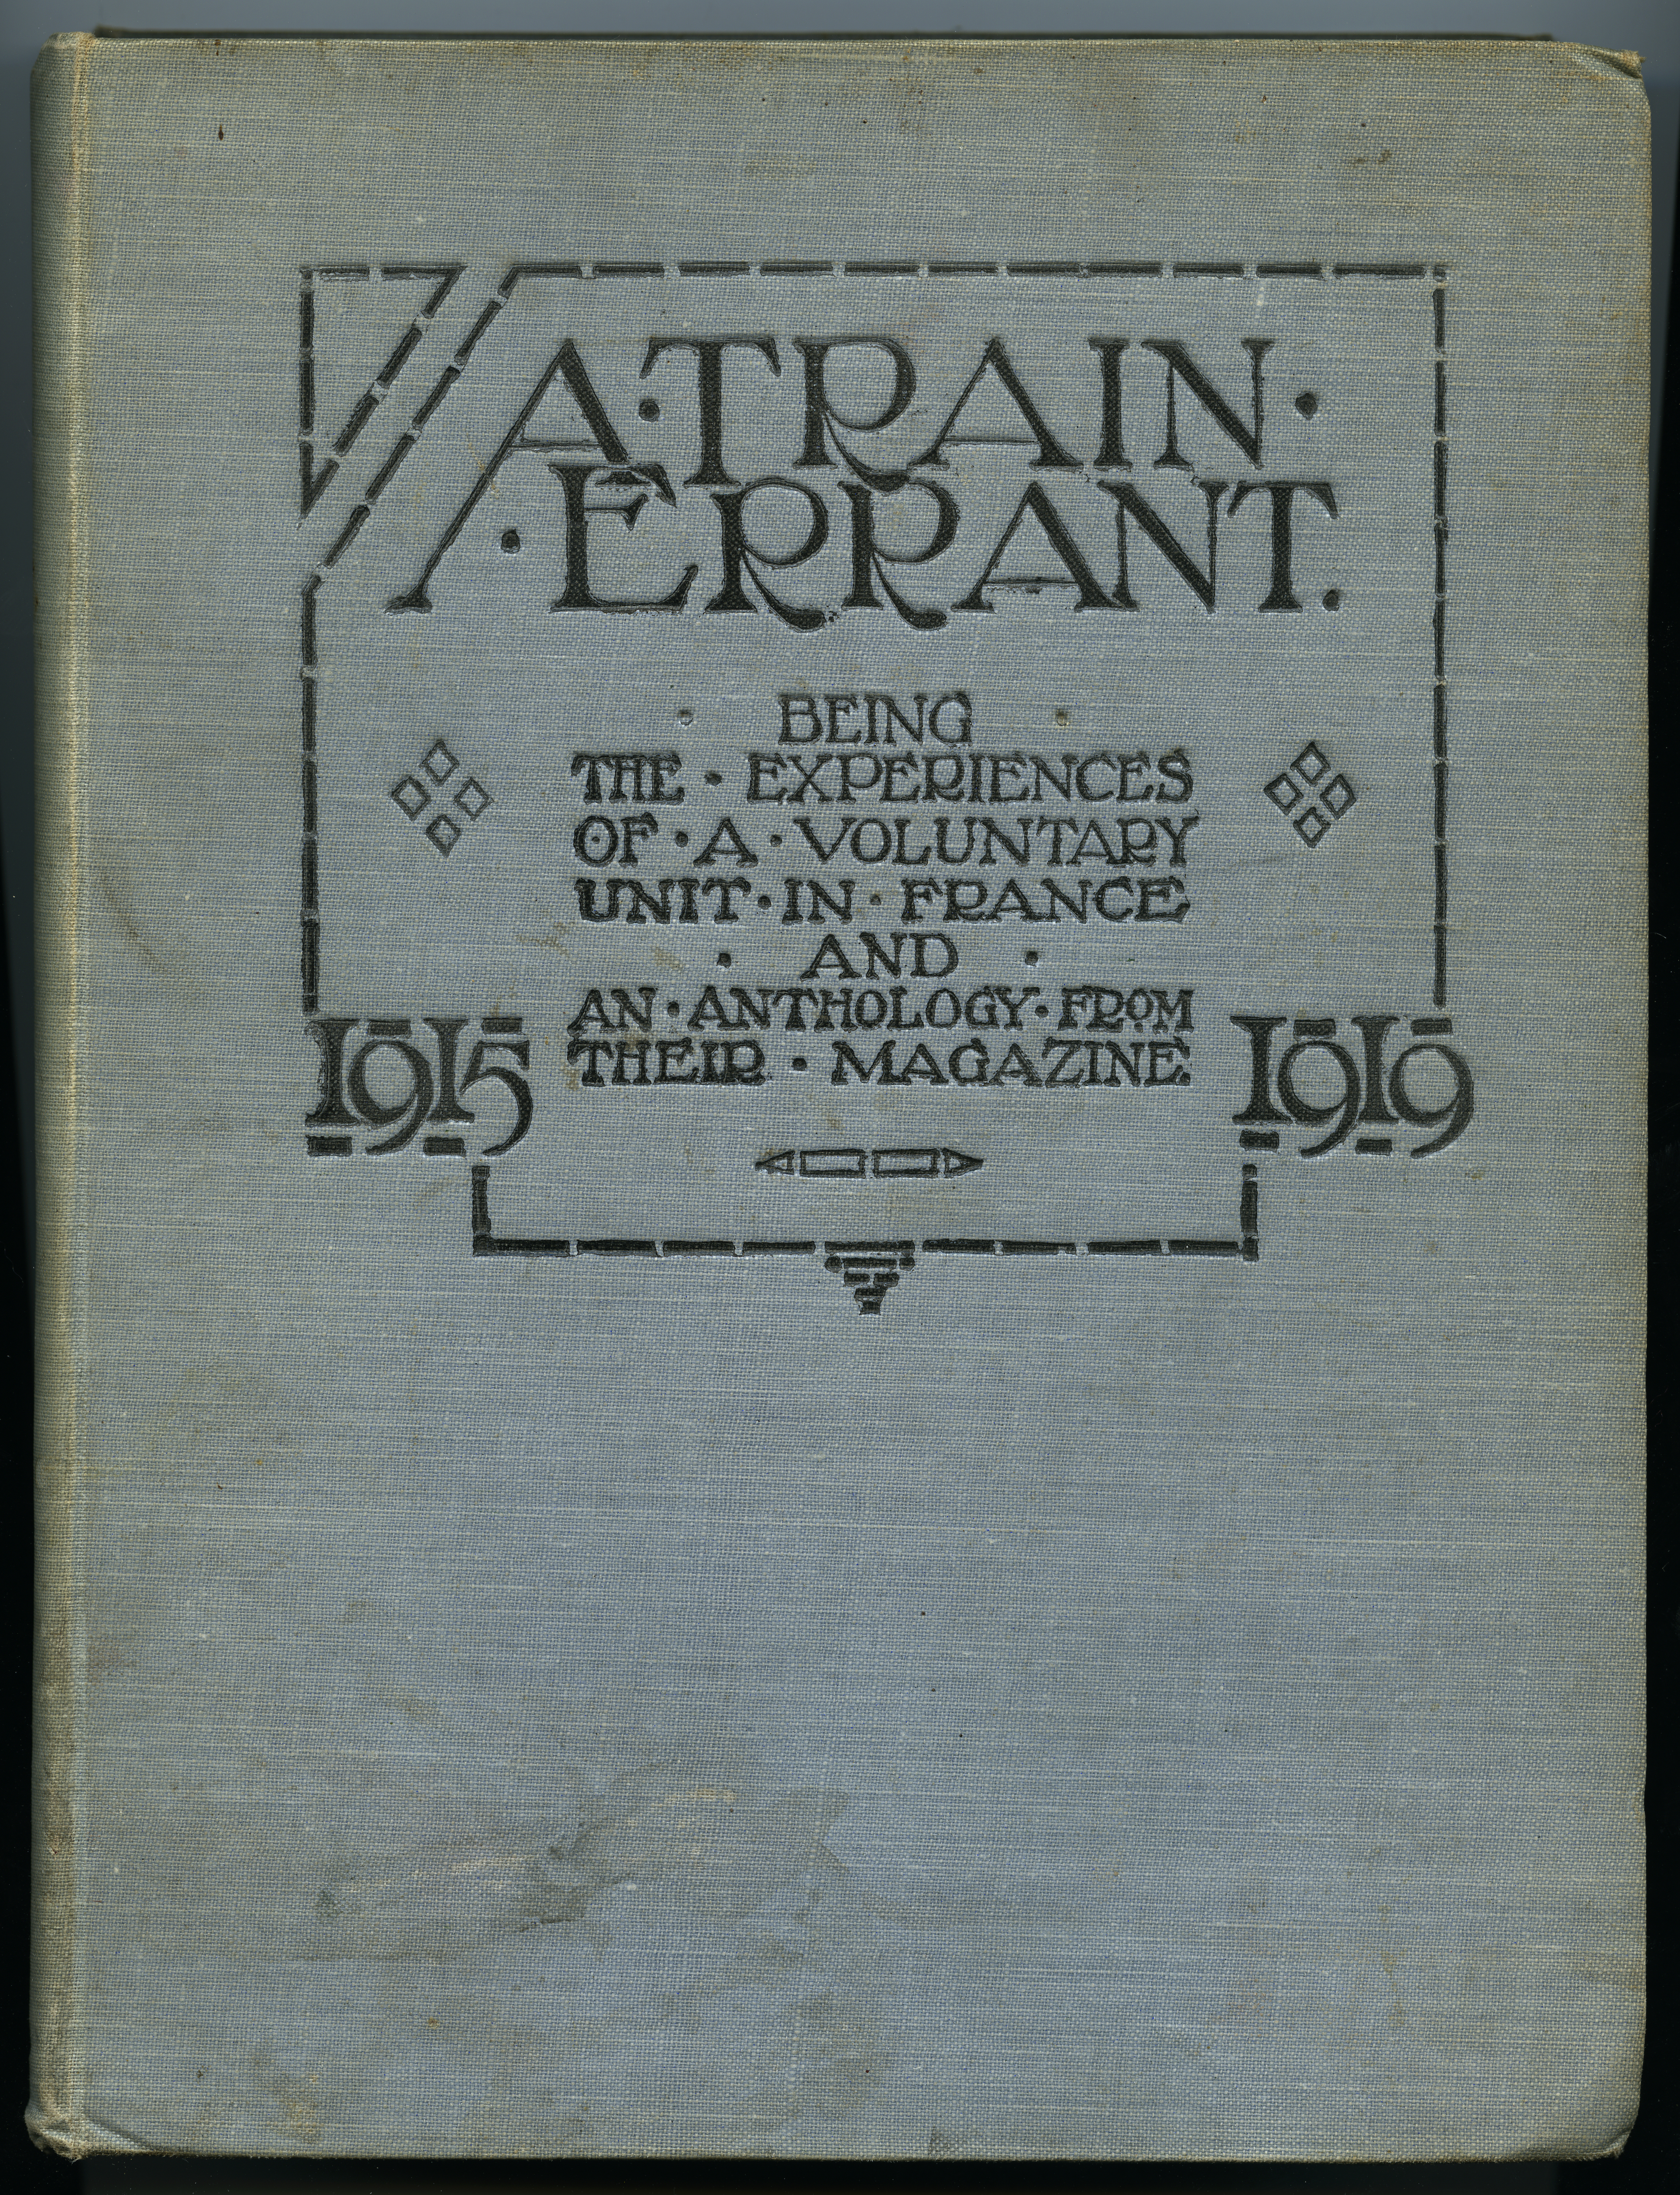 A.Train Errant. Being the experiences of a voluntary unit in France. 1915-1919